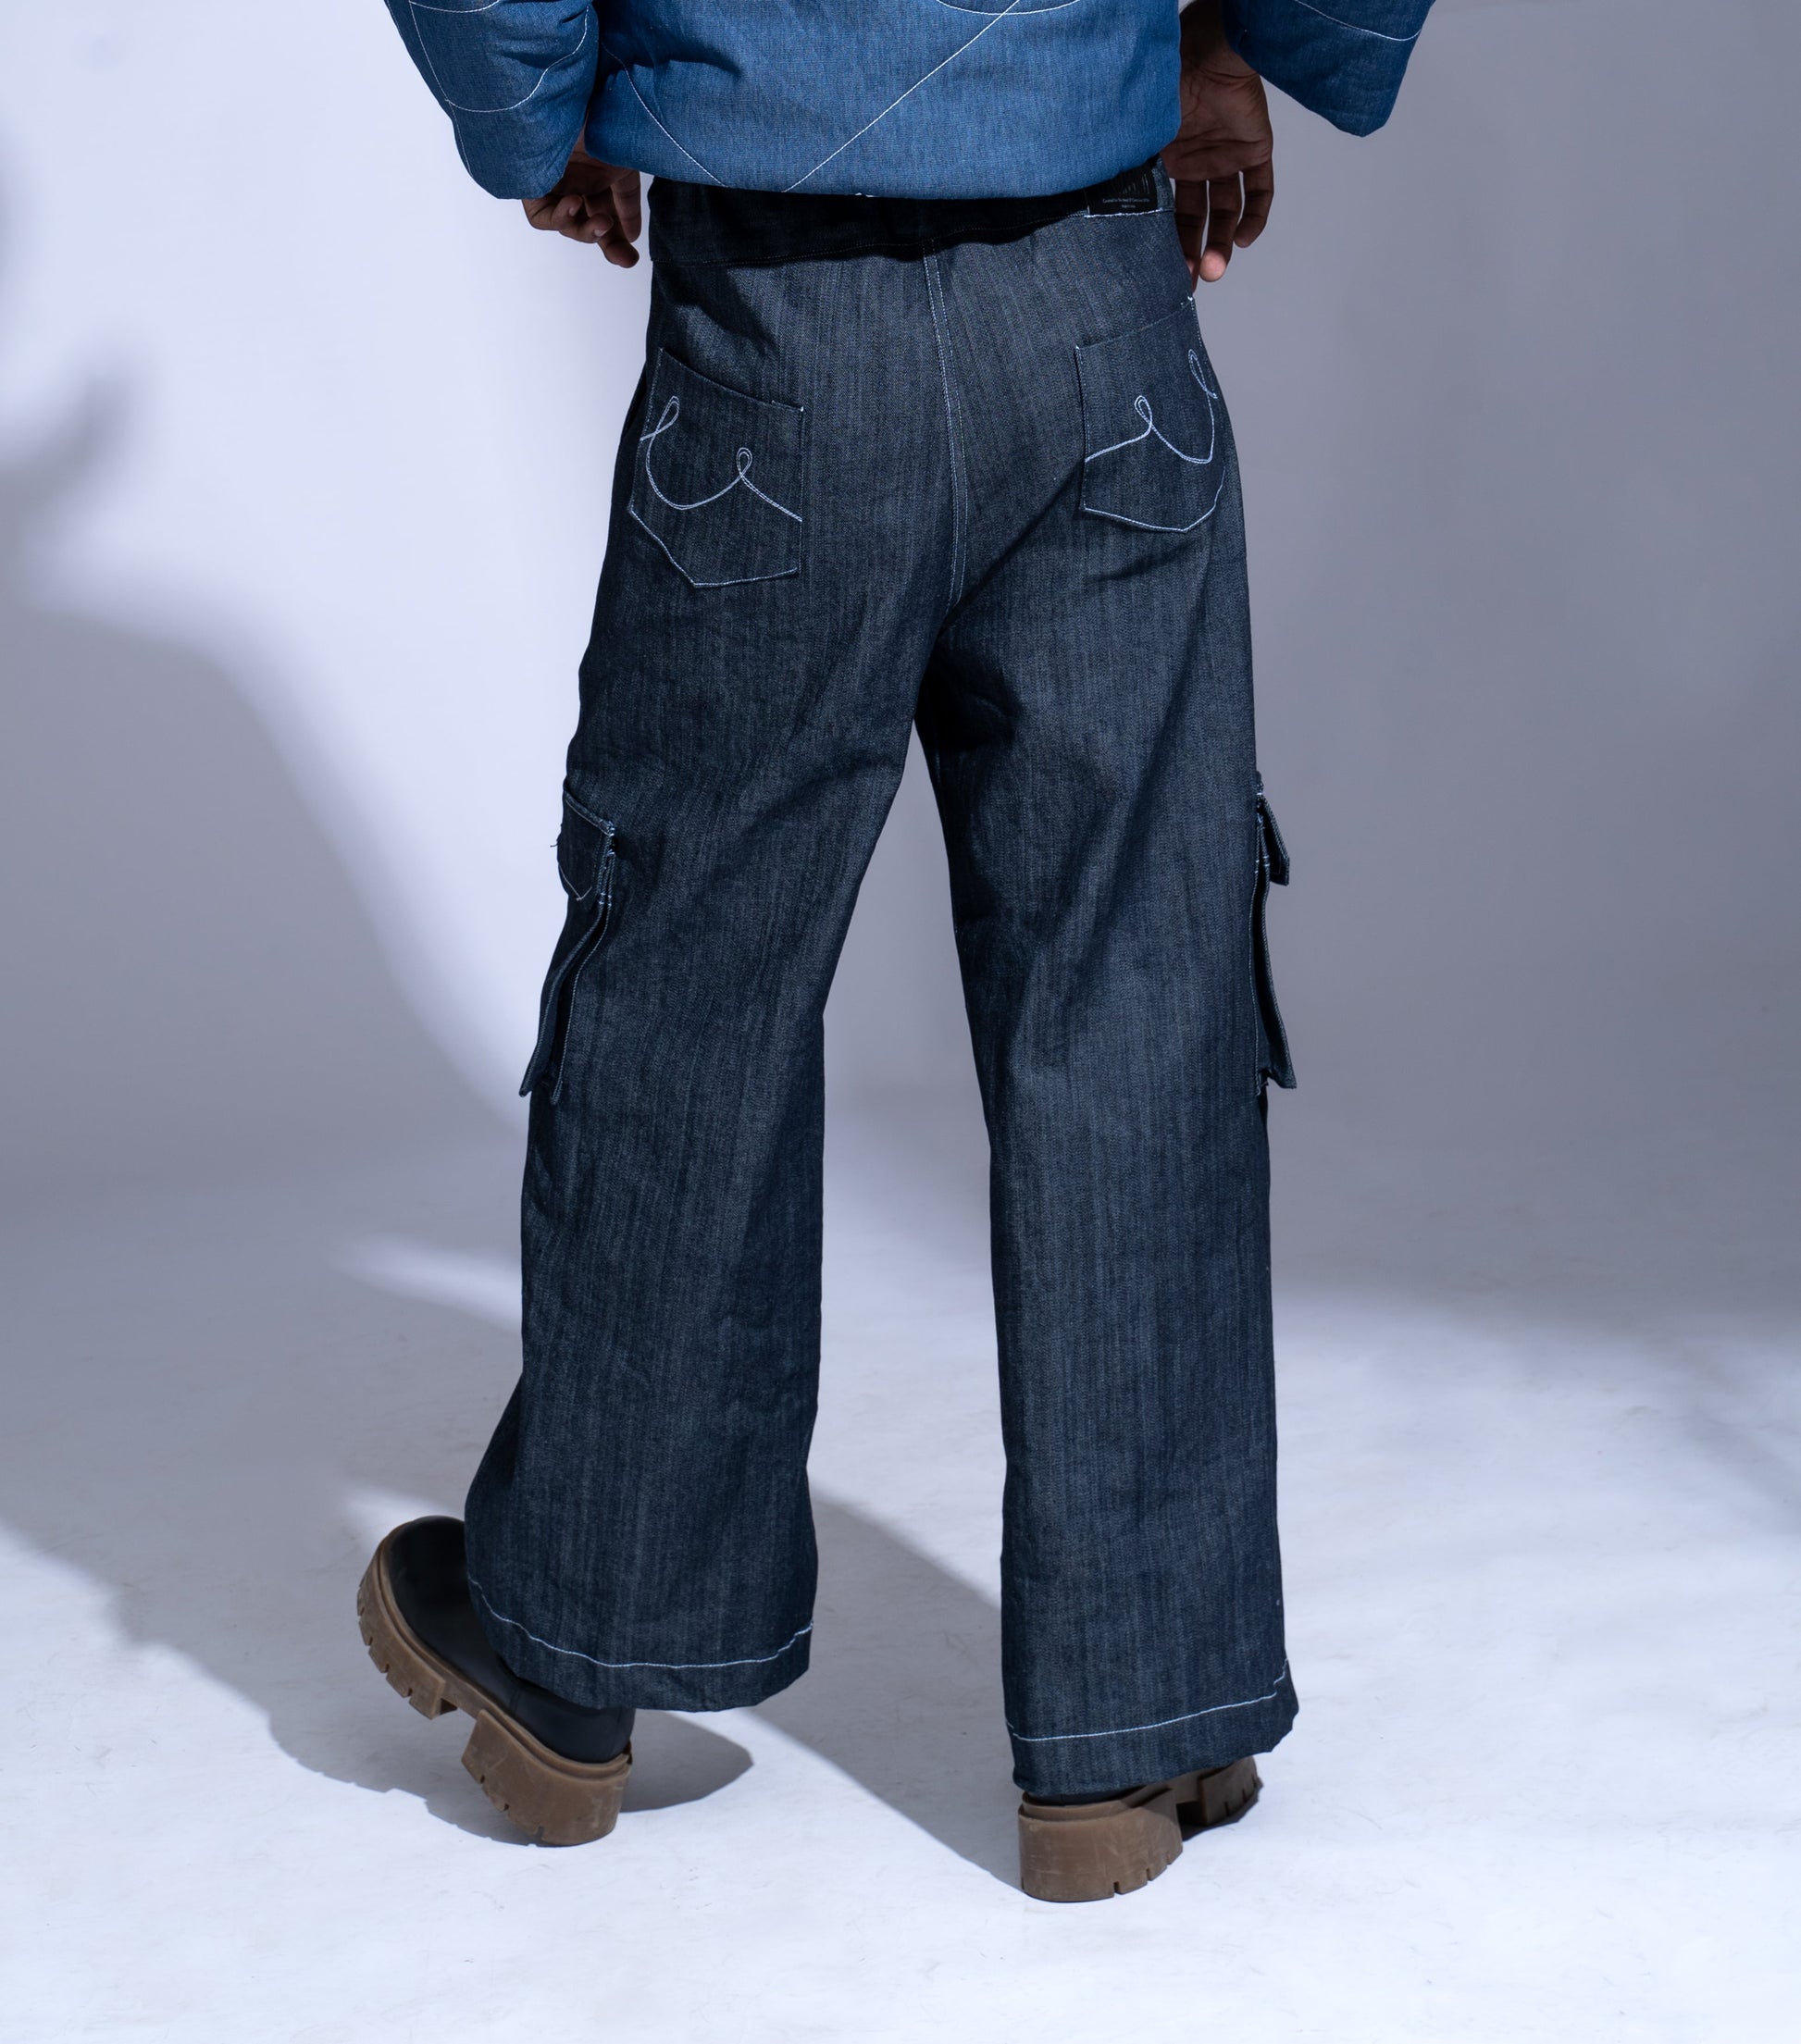 Elastic Jeans: The model is wearing Size 30M